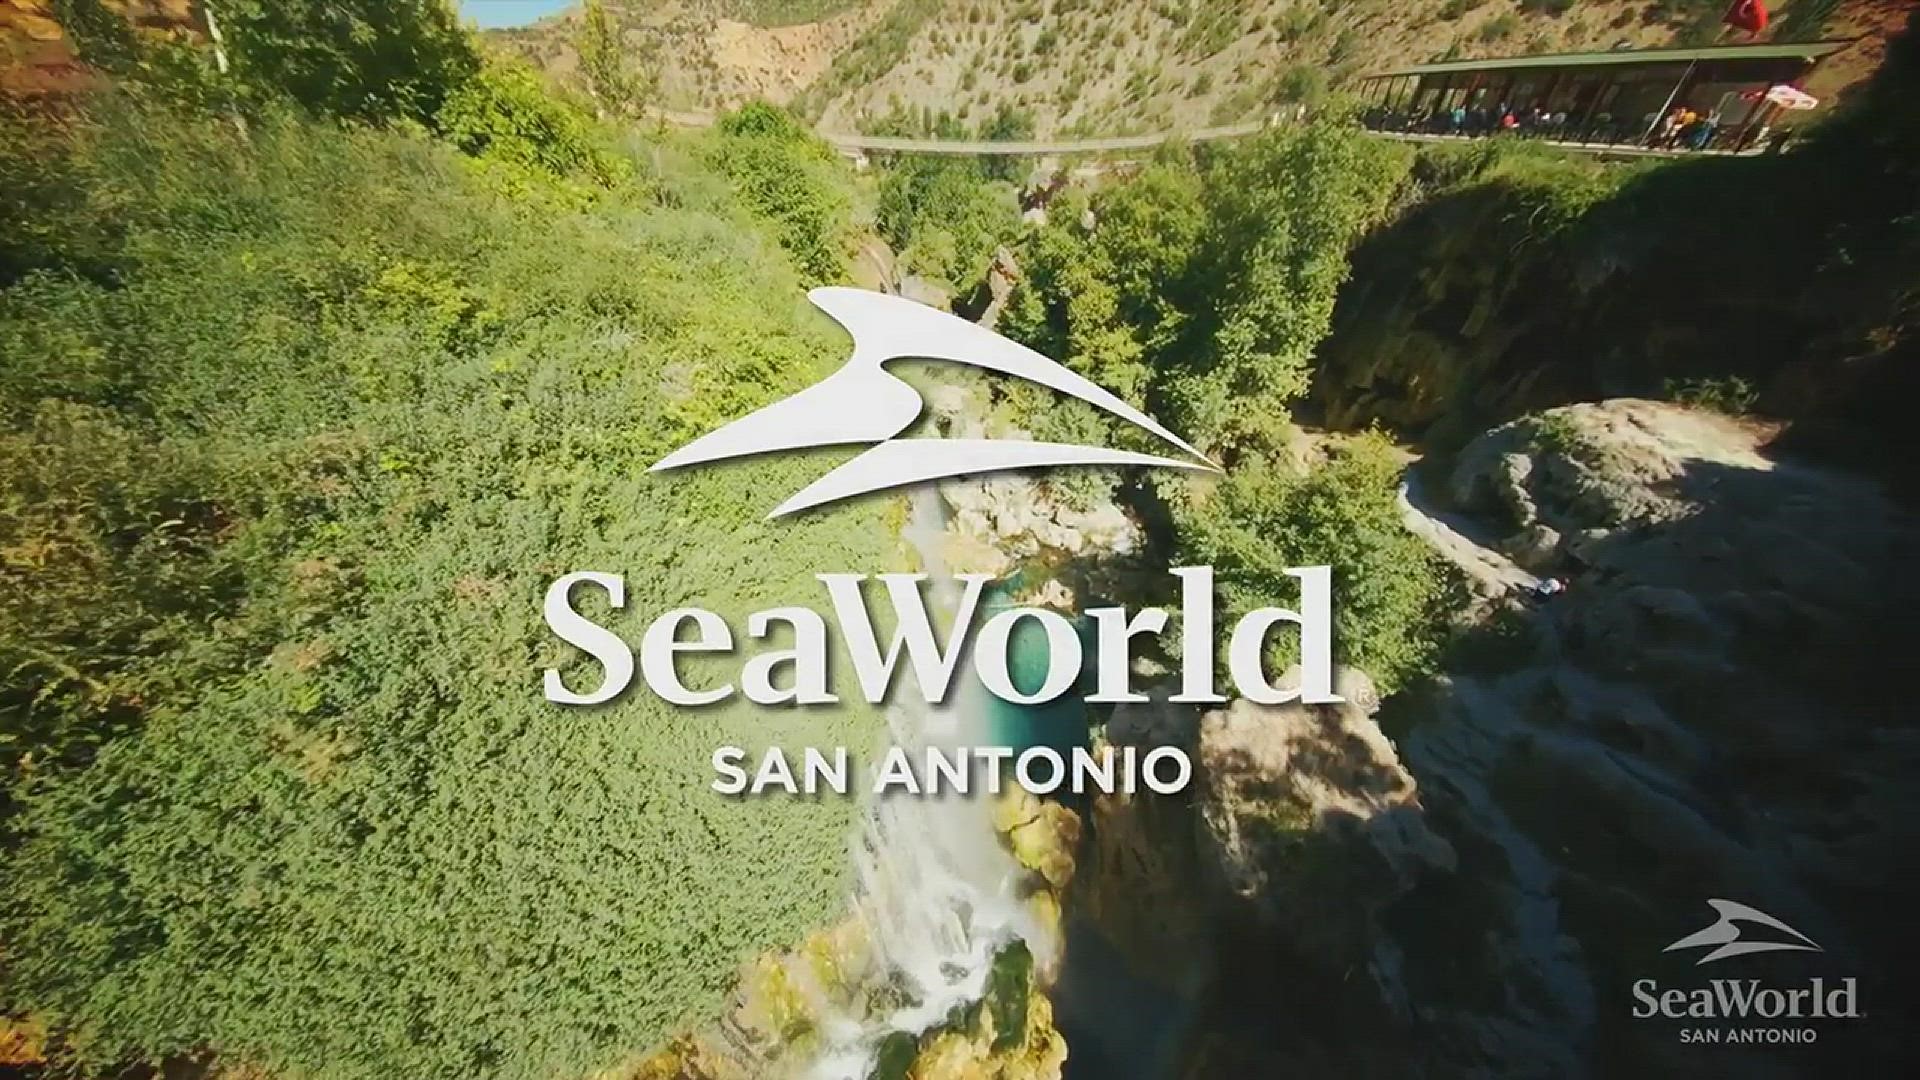 The new attraction will be the ninth ride to join SeaWorld San Antonio’s portfolio of thrilling rides.